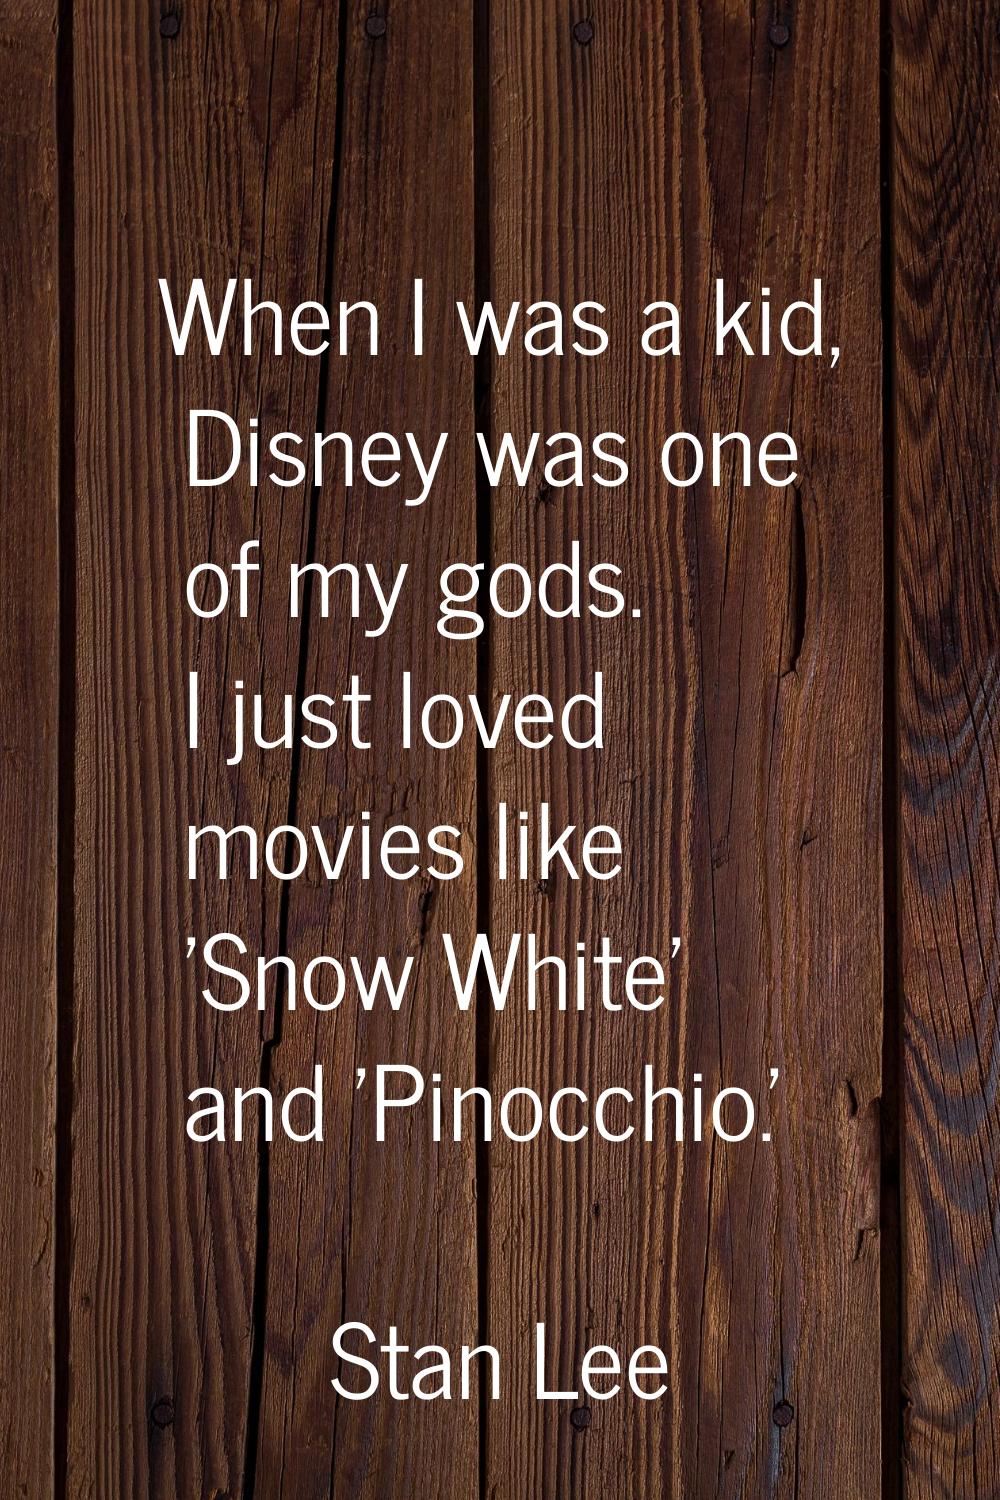 When I was a kid, Disney was one of my gods. I just loved movies like 'Snow White' and 'Pinocchio.'